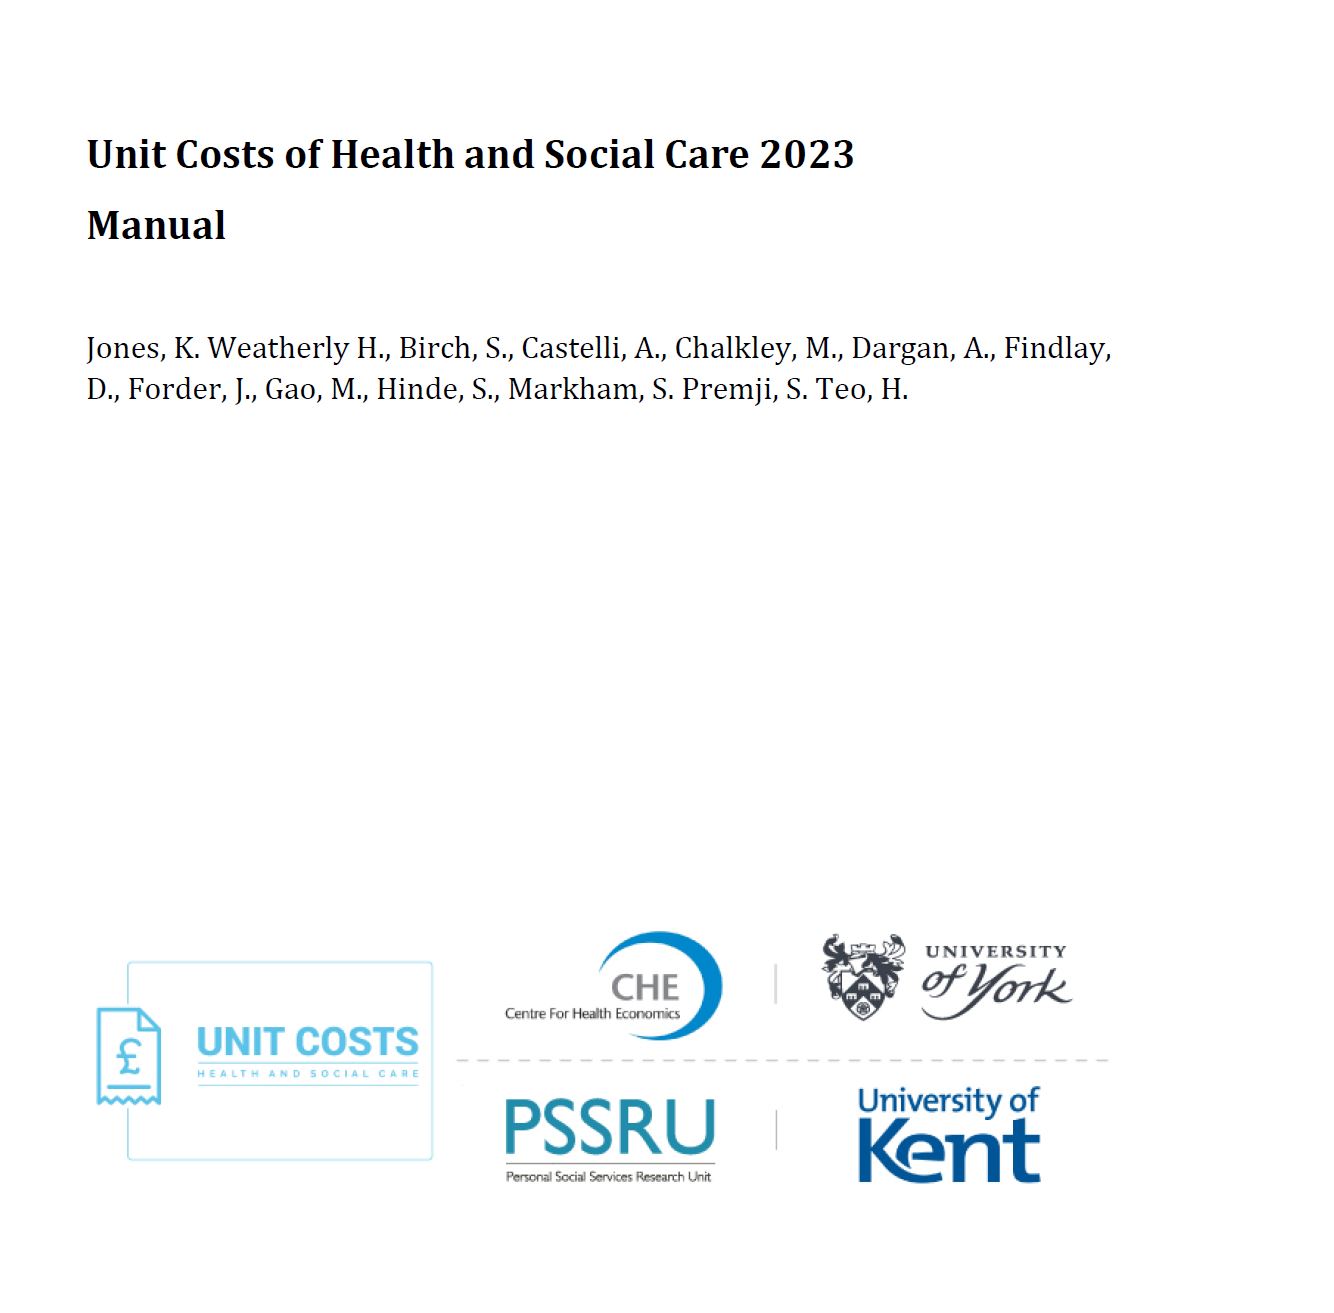 Picture of front page of the latest Unit Costs manual 2023